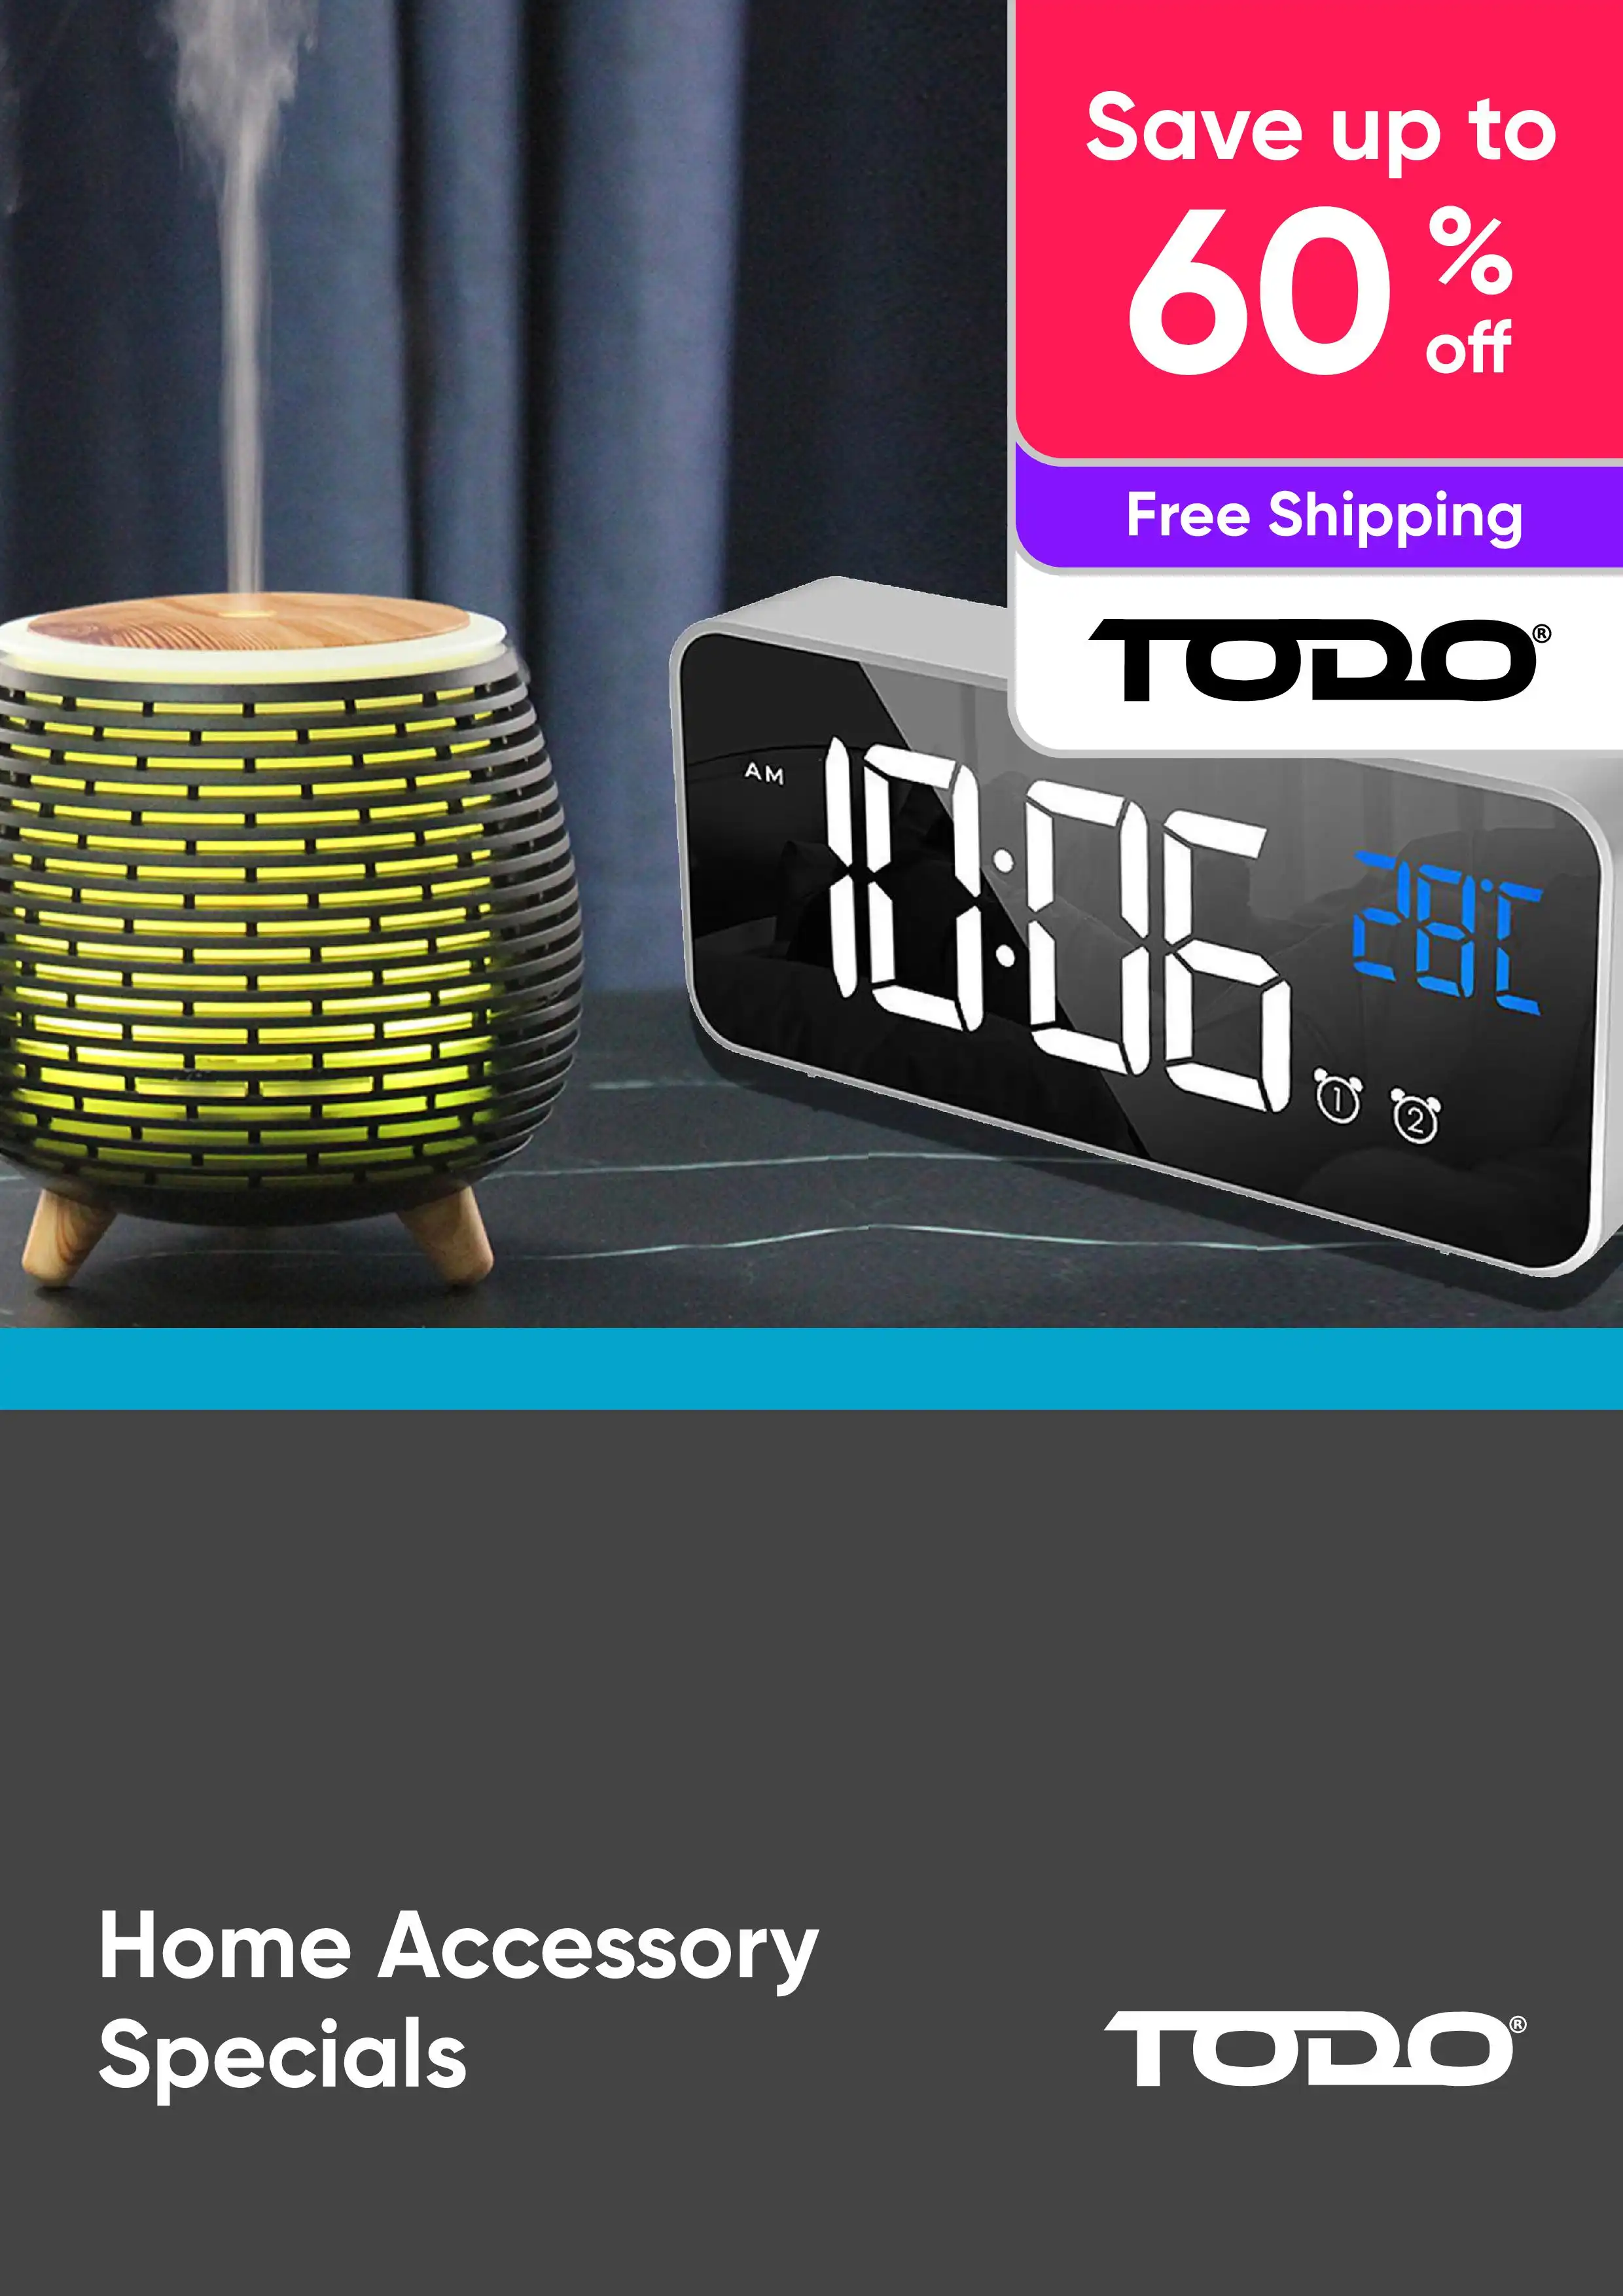 Home Accessory Sale - Humidifiers, Diffusers, TV Wall Brackets, Alarm Clocks and More - Up to 60% Off